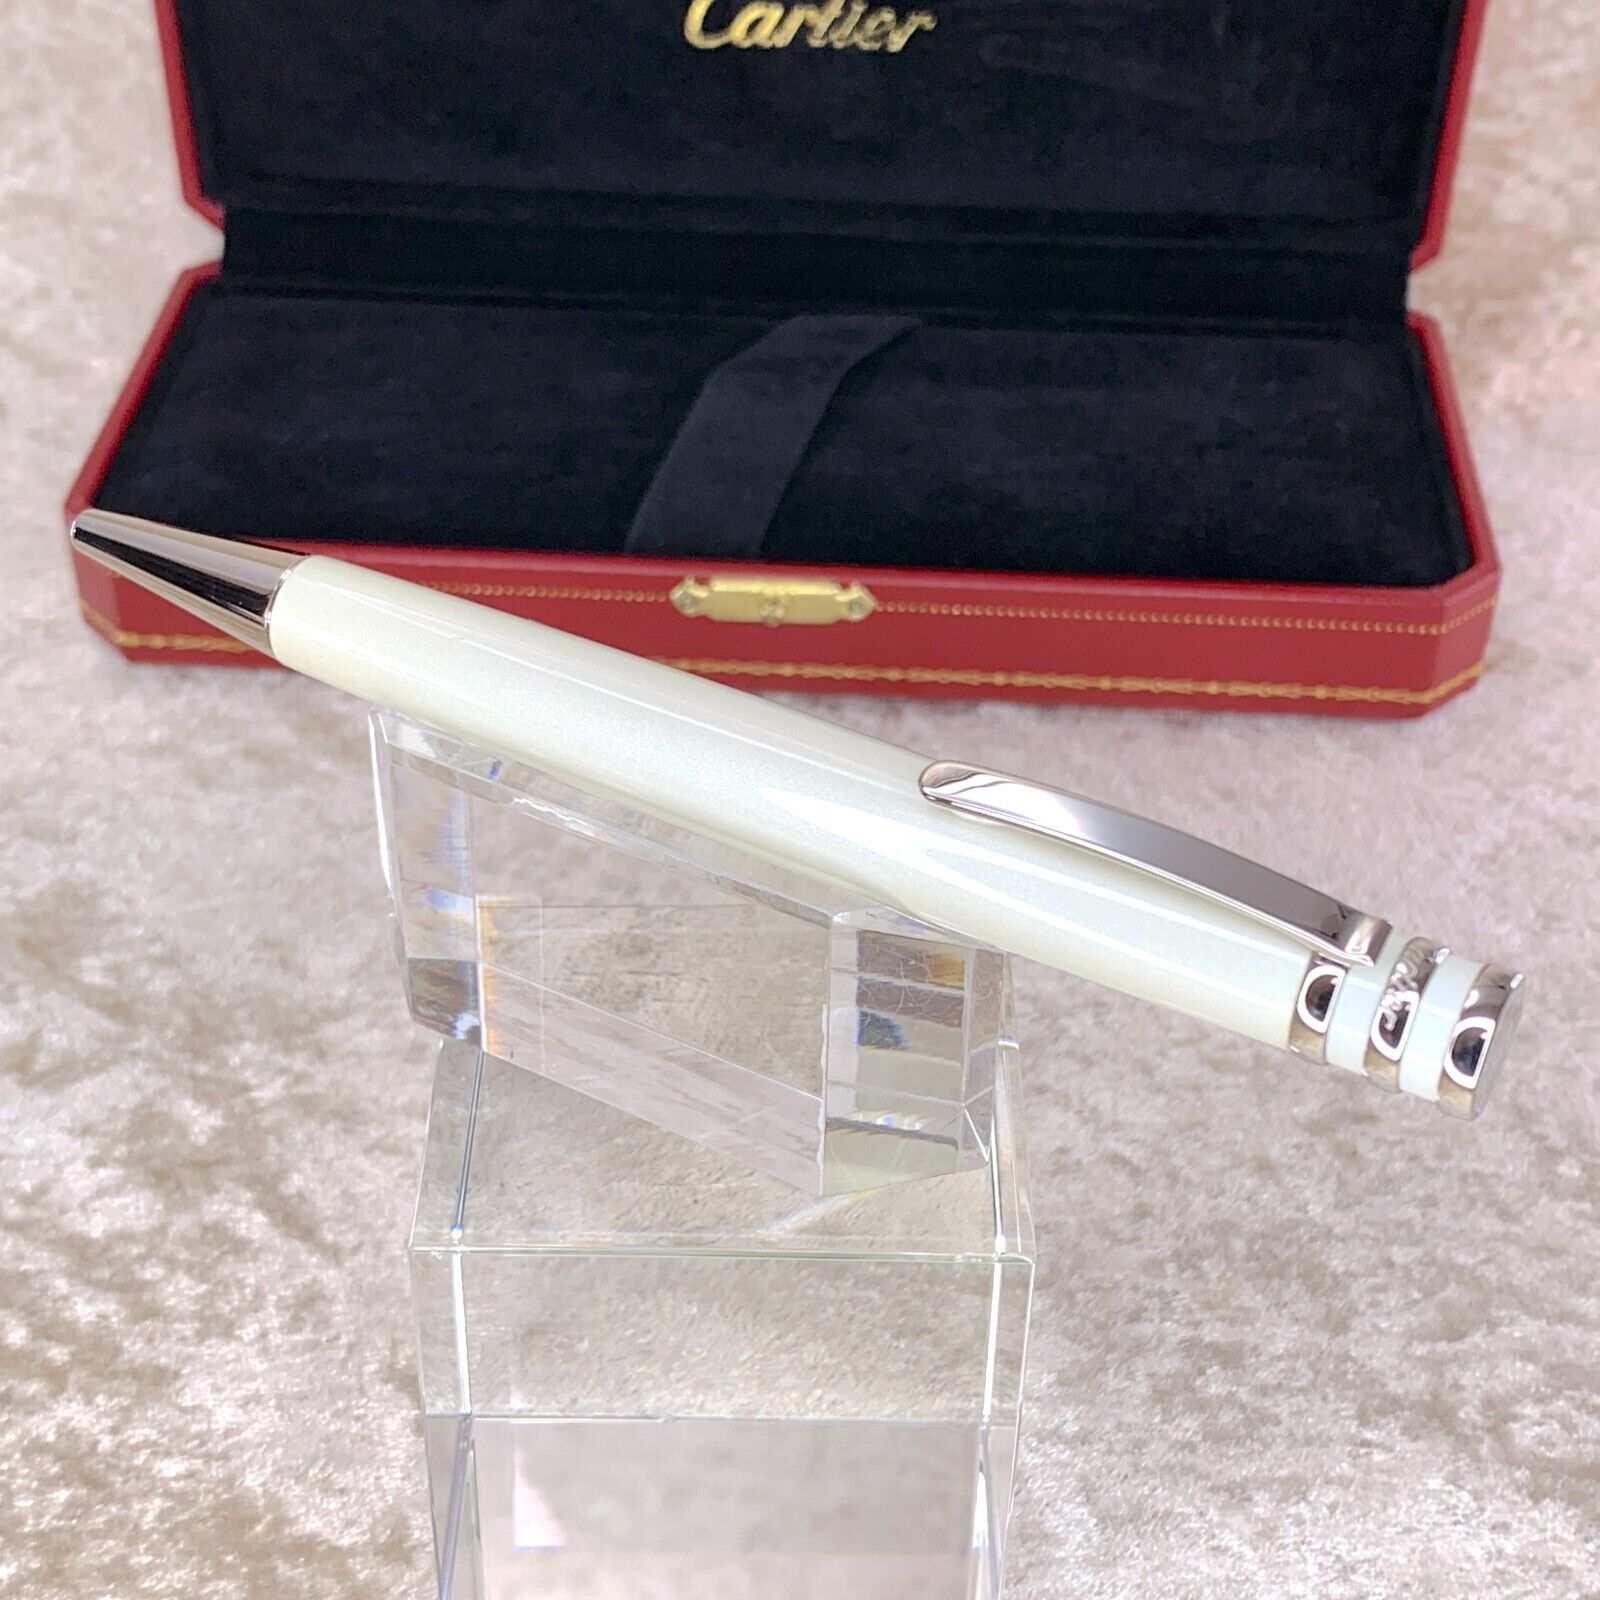 Cartier Ballpoint Pen Trinity Pearl White Lacquer Finish with Case